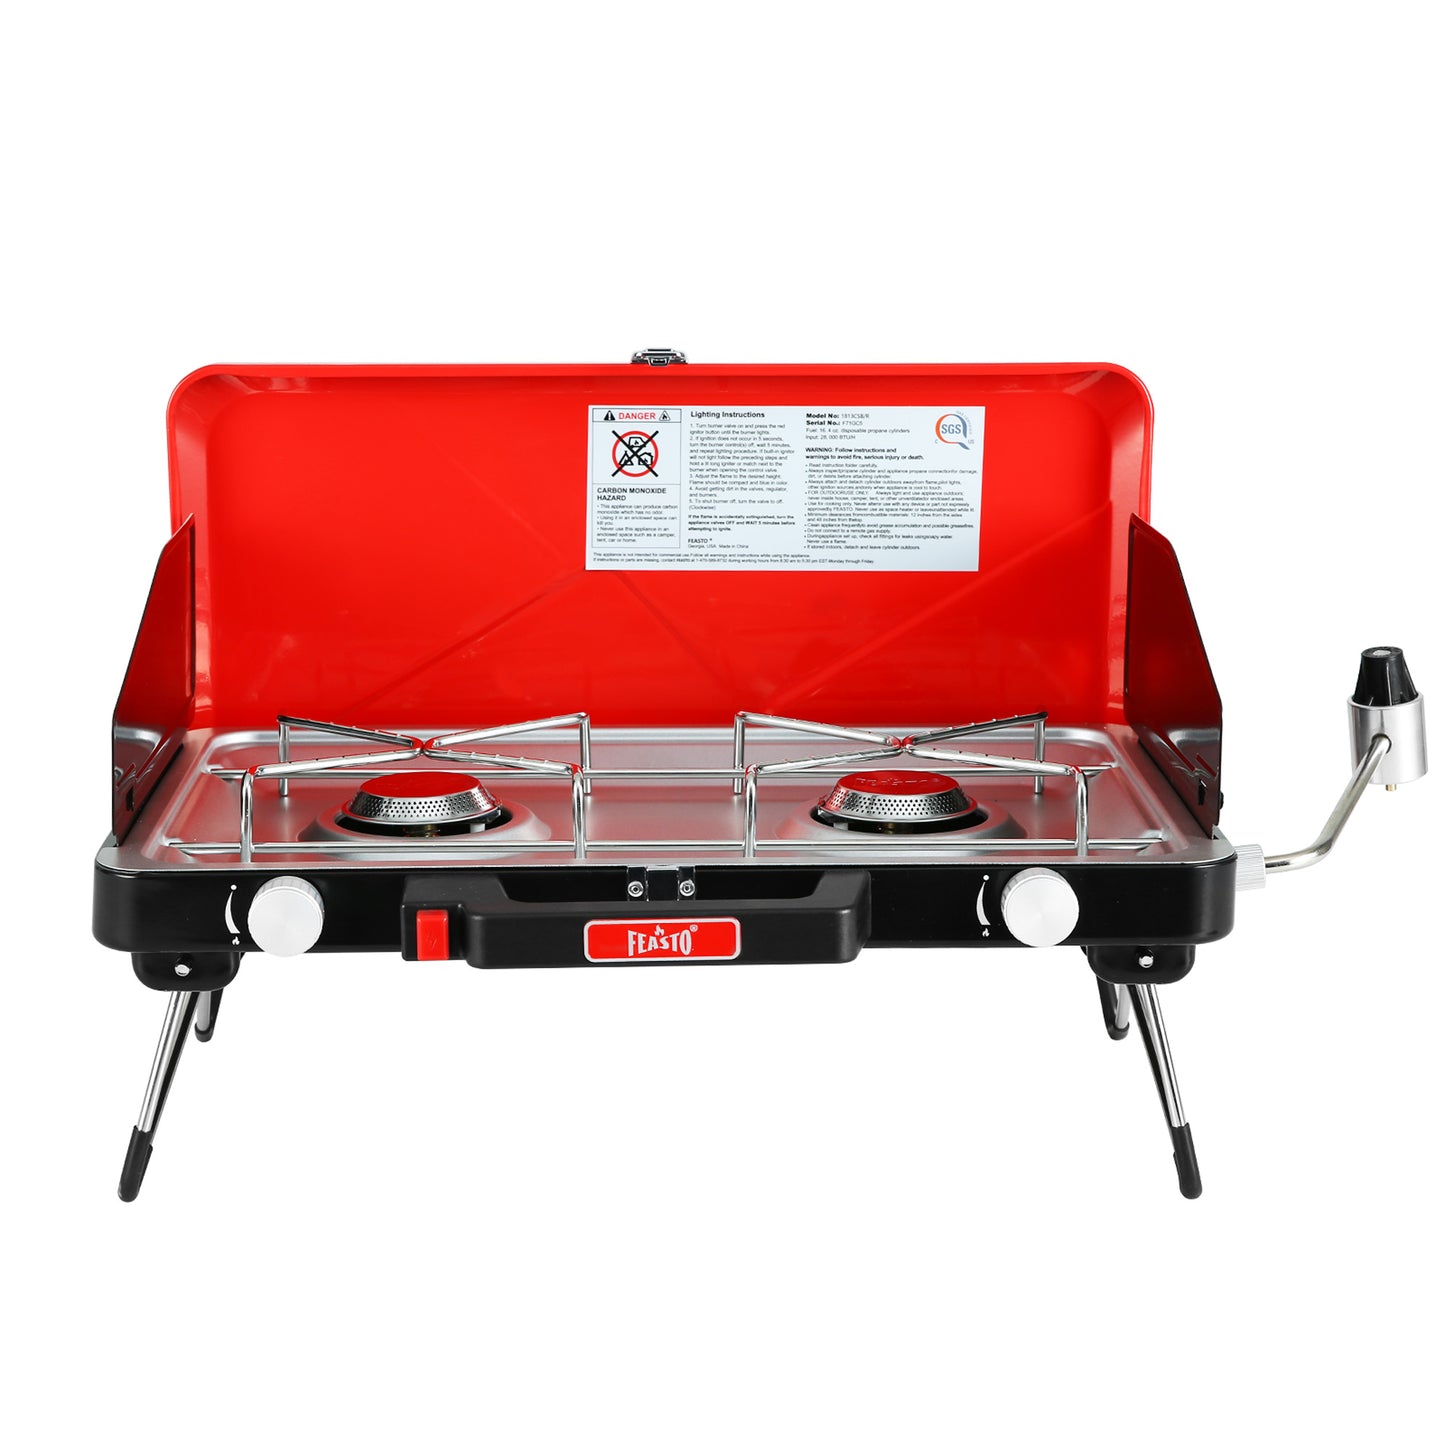 FEASTO Propane Camping Stove with Two Adjustable High Power Windproof Burners and Two Folding Legs Convenient for Outdoor Camping Picnic L22.8’’x W14.1’’x H13.6’’ (Red)